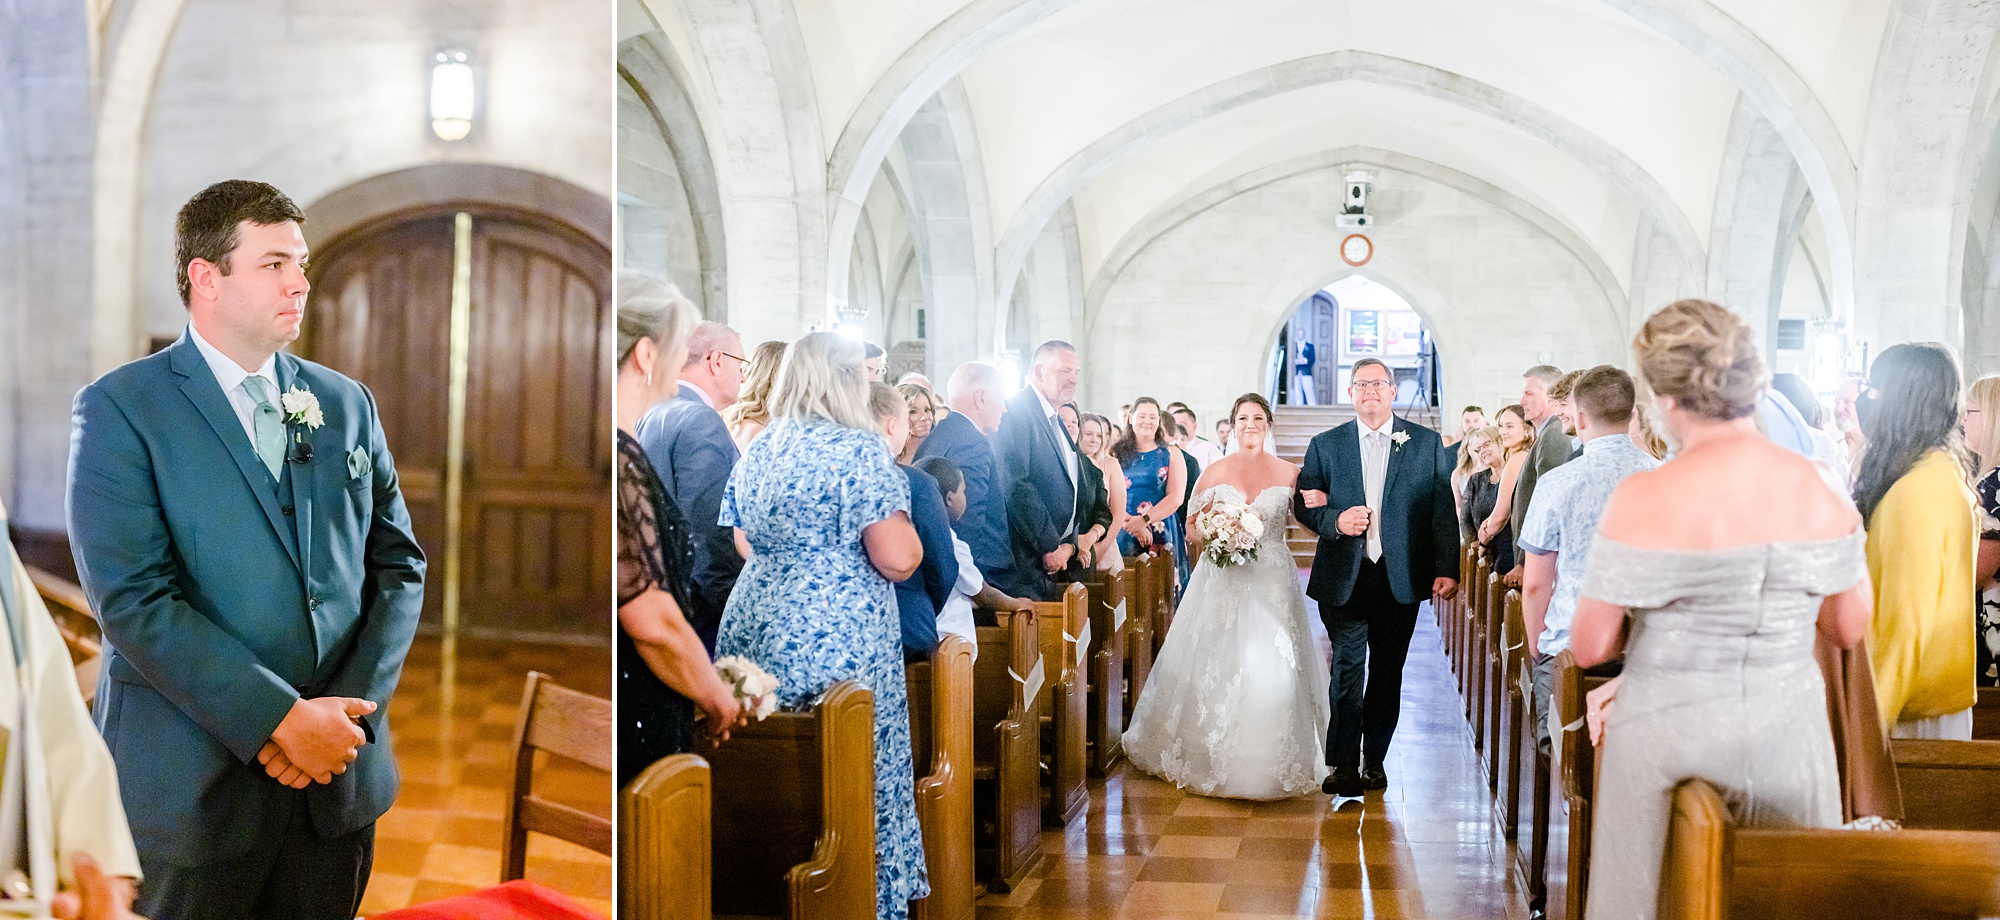 bride walks up aisle with dad during ceremony at Saint Andrews School